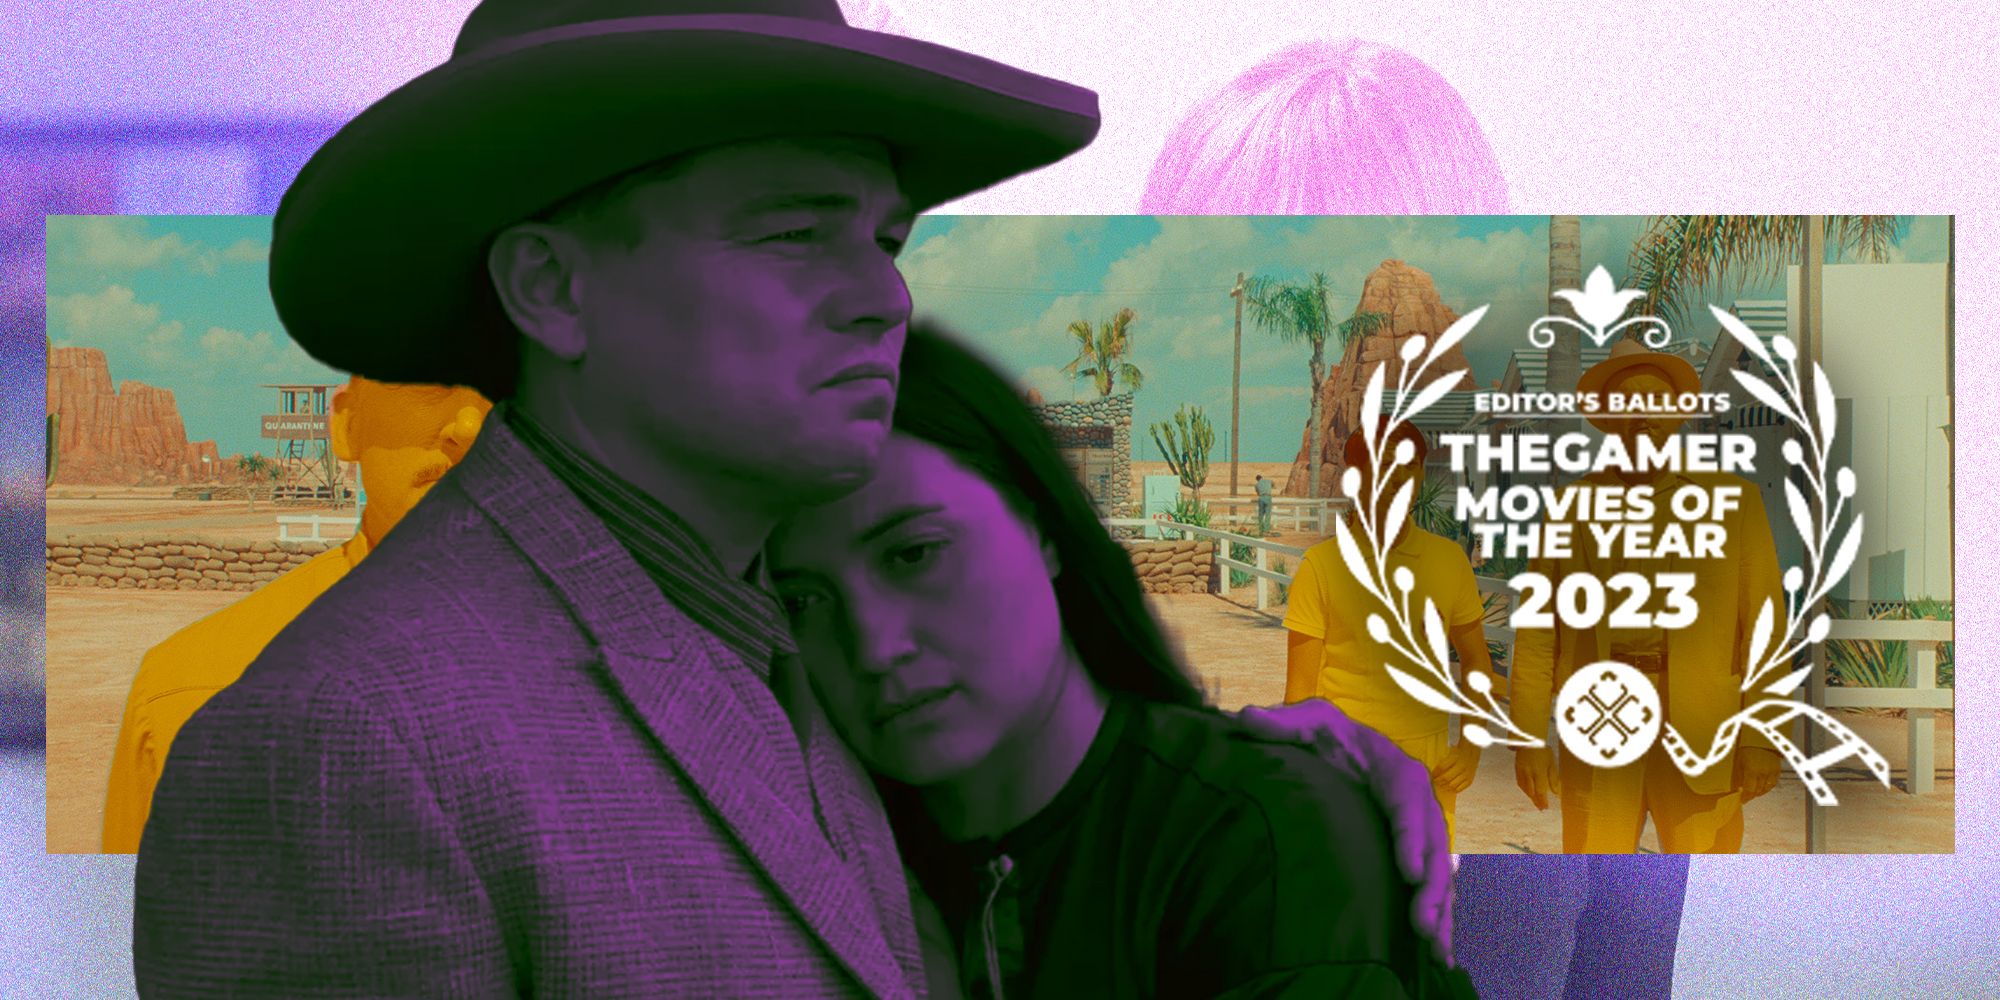 Movies of the Year nominees list with Killers of the Flower Moon and Asteroid City